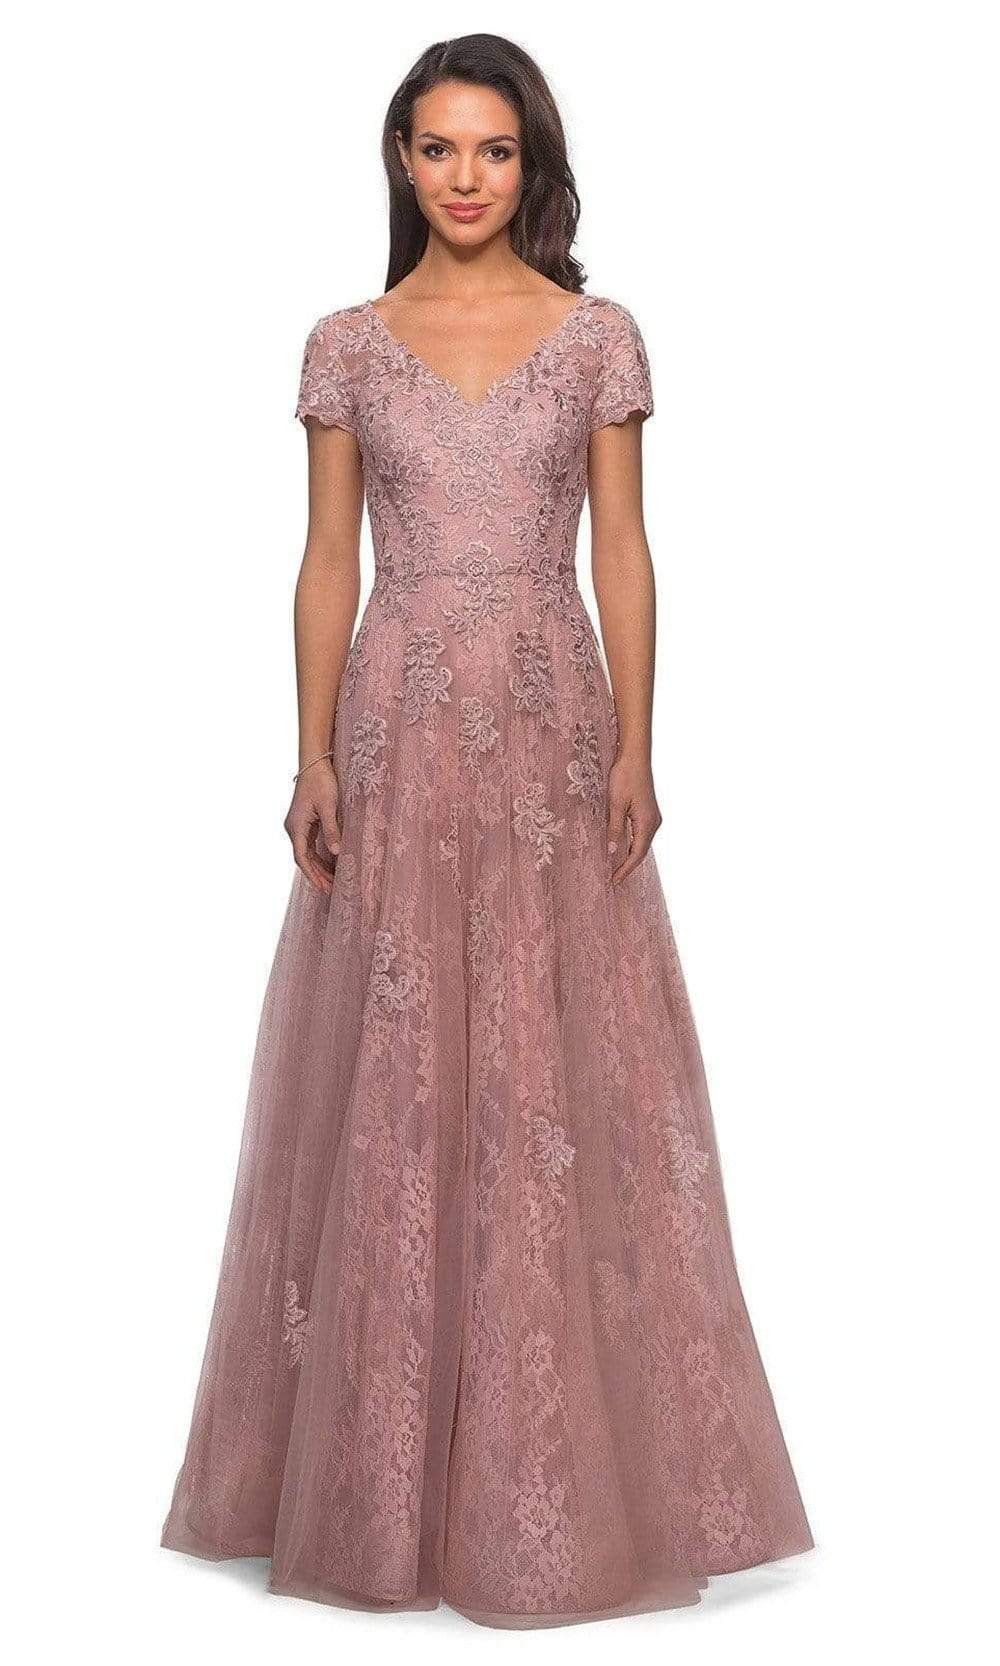 Image of La Femme - 28028 Lace Inset Embroidered A-line Gown